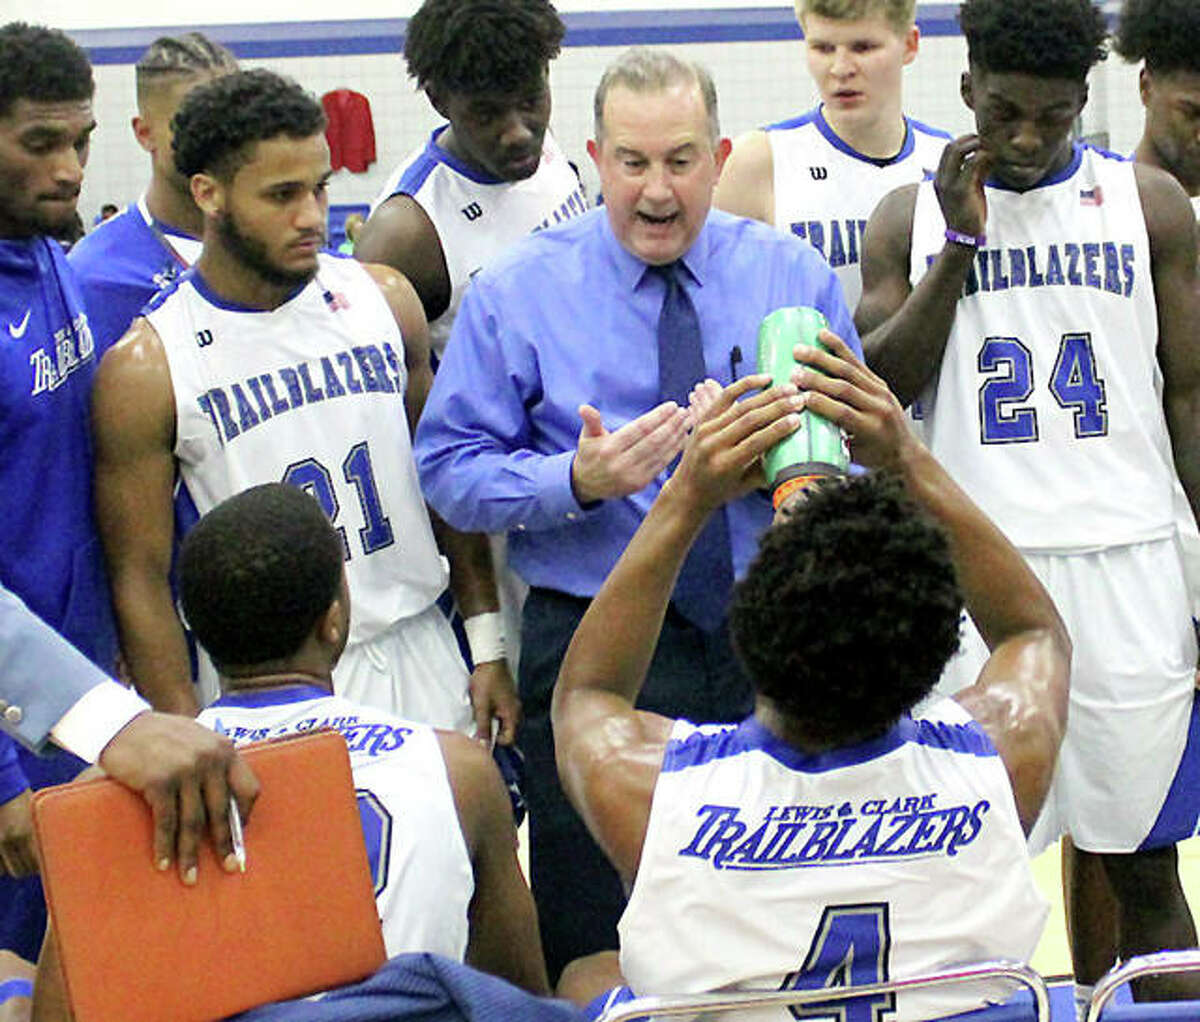 LCCC men’s basketball coach Doug Stotler gives his team instructions during the team’s home opener against Wabash Valley.